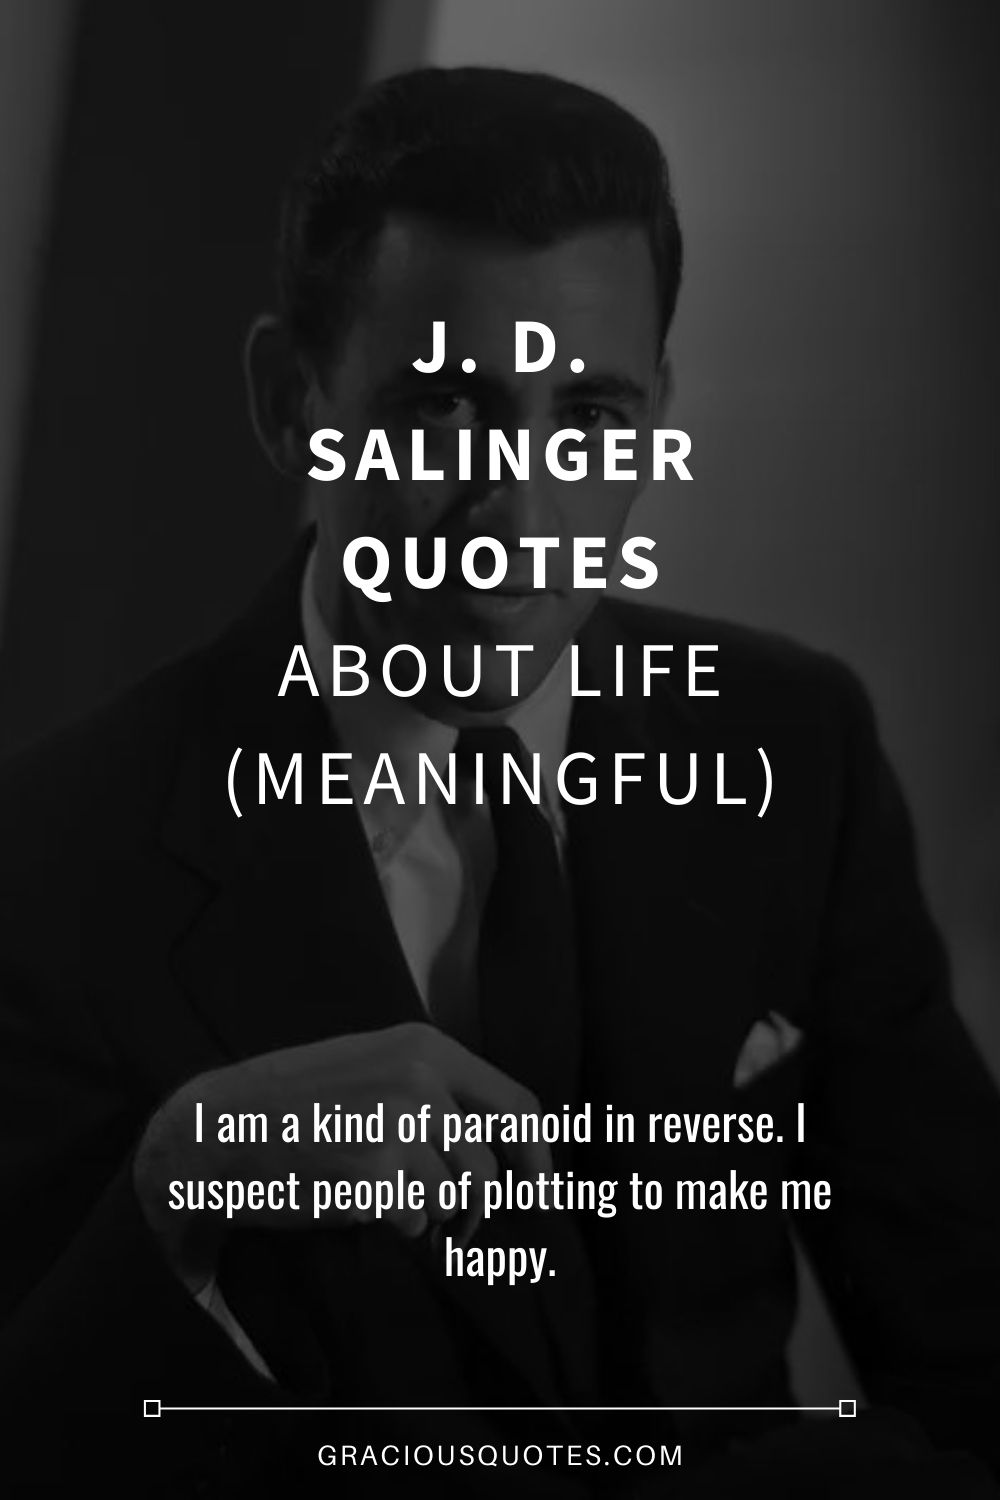 J. D. Salinger Quotes About Life (MEANINGFUL) - Gracious Quotes